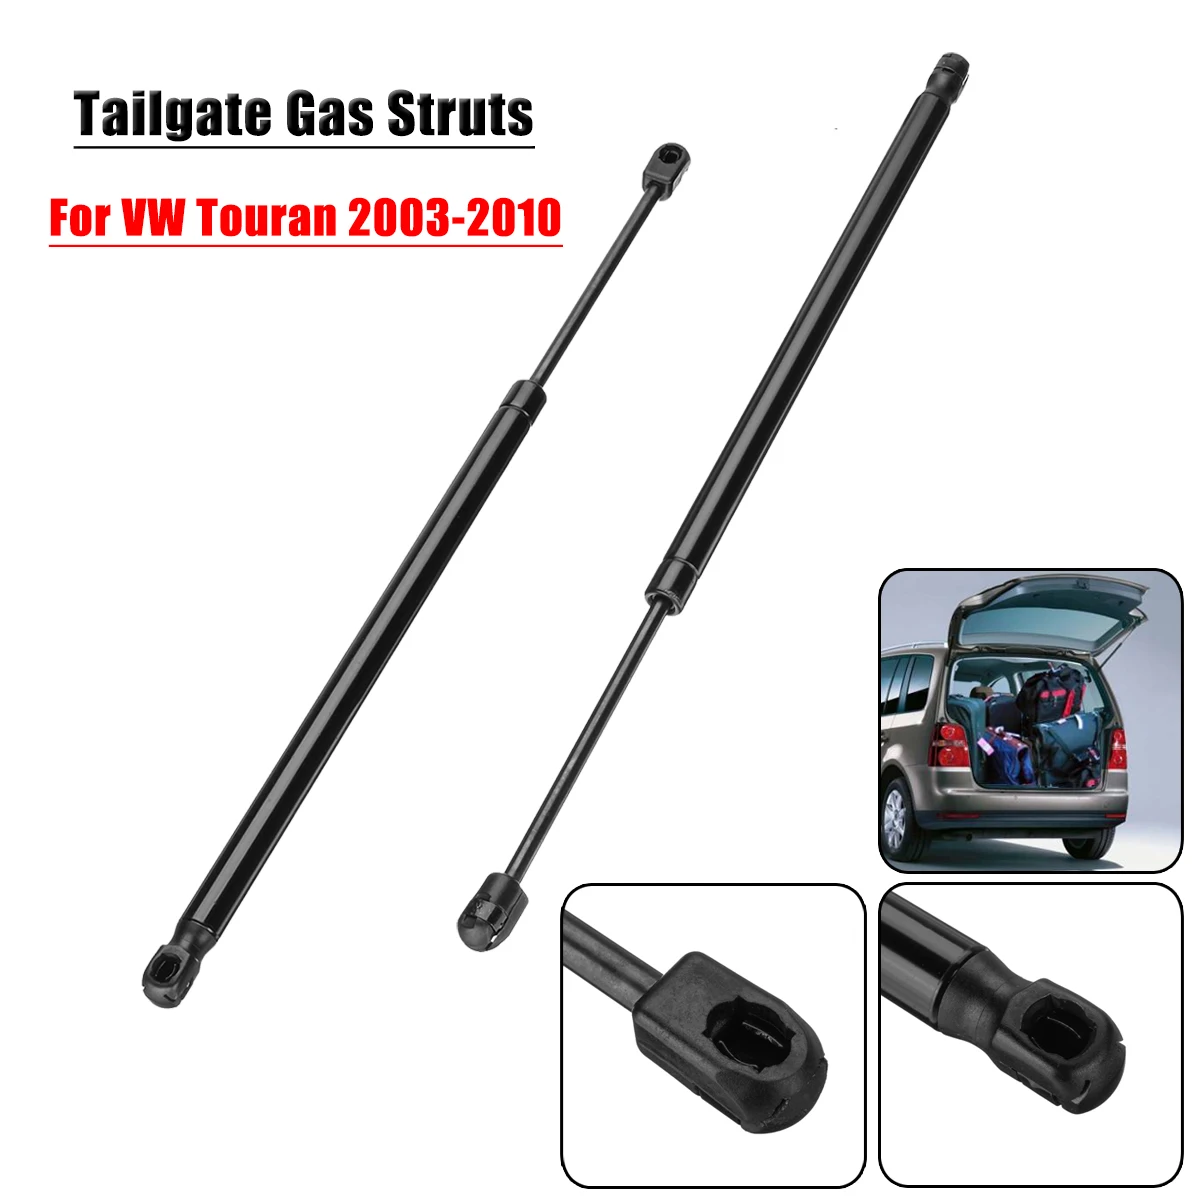 

2pcs 1T0827550C Car Rear Tailgate Gas Struts Boot Lifter Supports for Volkswagen VW Touran 2003-2010 1T1, 1T2 2003-2010 MPV